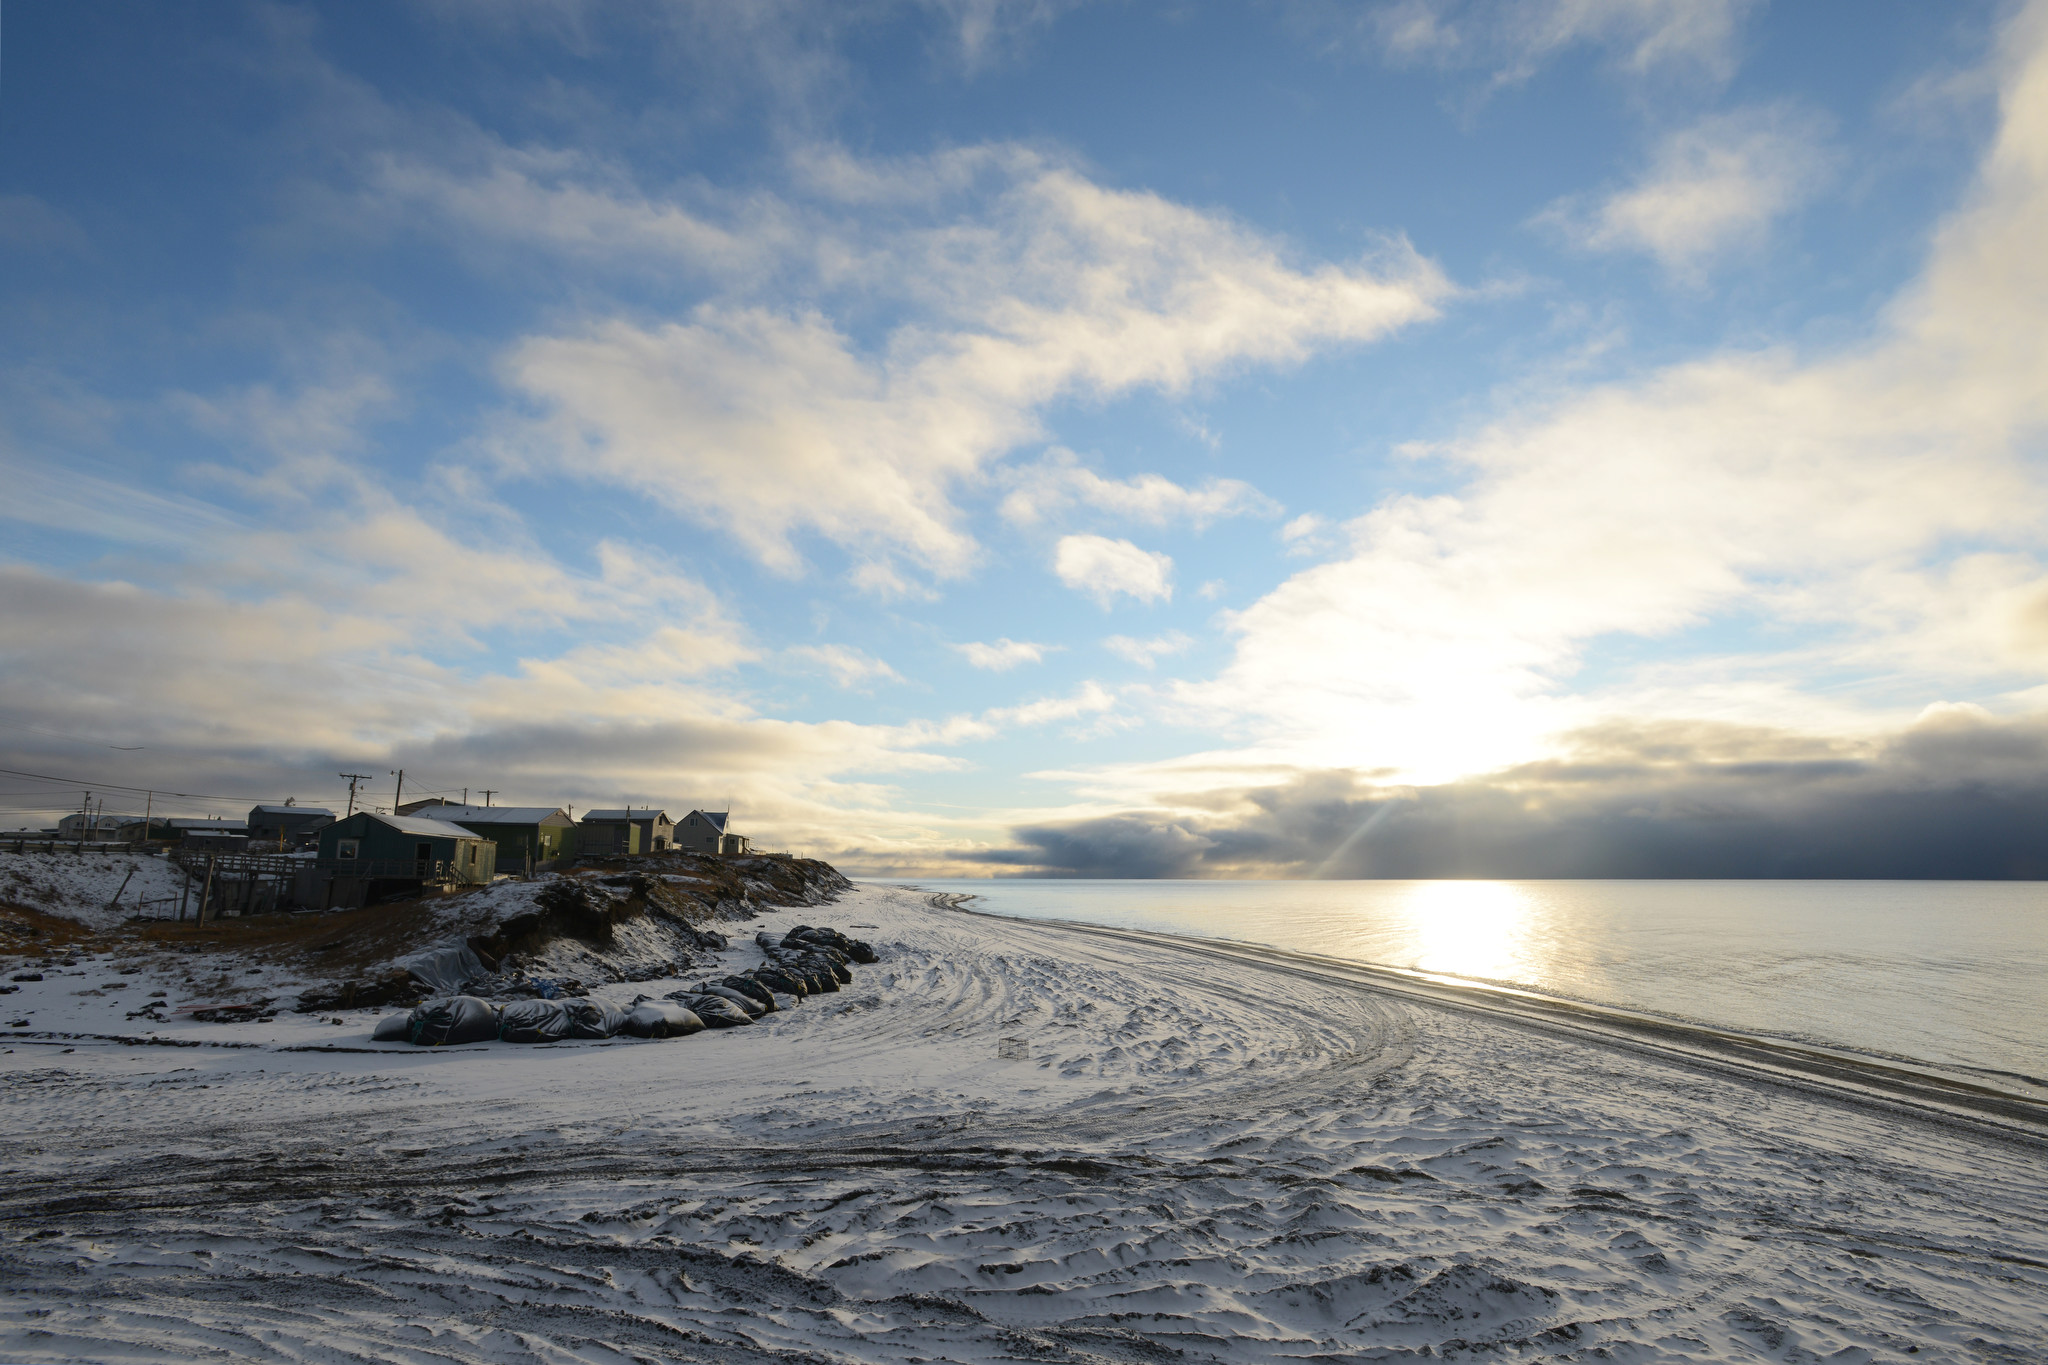 Following a snowstorm, the sun makes an evening appearance at the bluffs that include the Ukkuqsi archaeological site on Monday, September 21, 2015, in Barrow. Sand bags help protect the site, which once again yielded human remains following a late-August storm. (Erik Hill / Alaska Dispatch News)